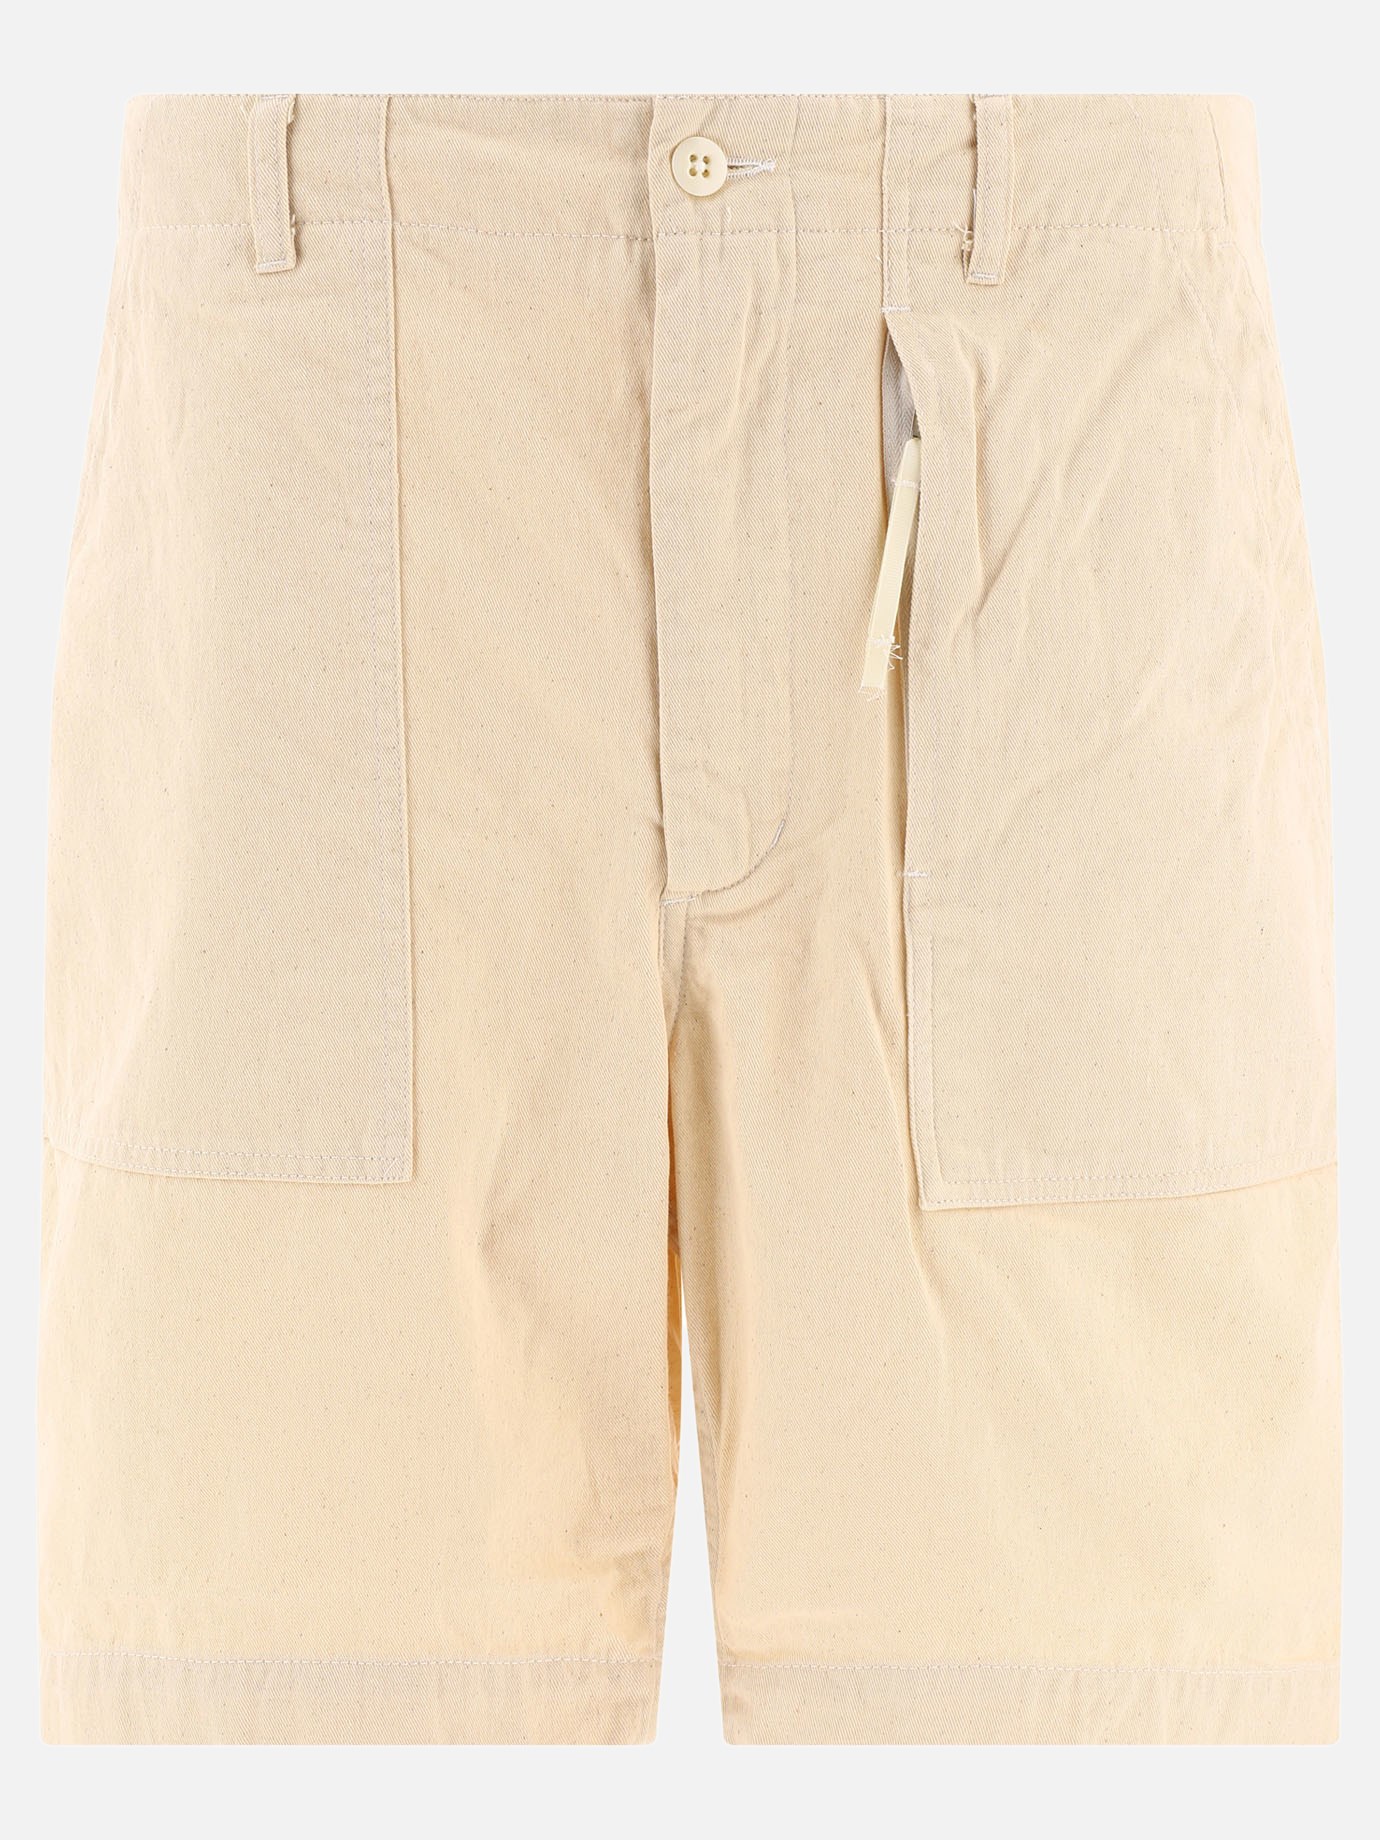 Short  Fatigue by Engineered Garments - 3